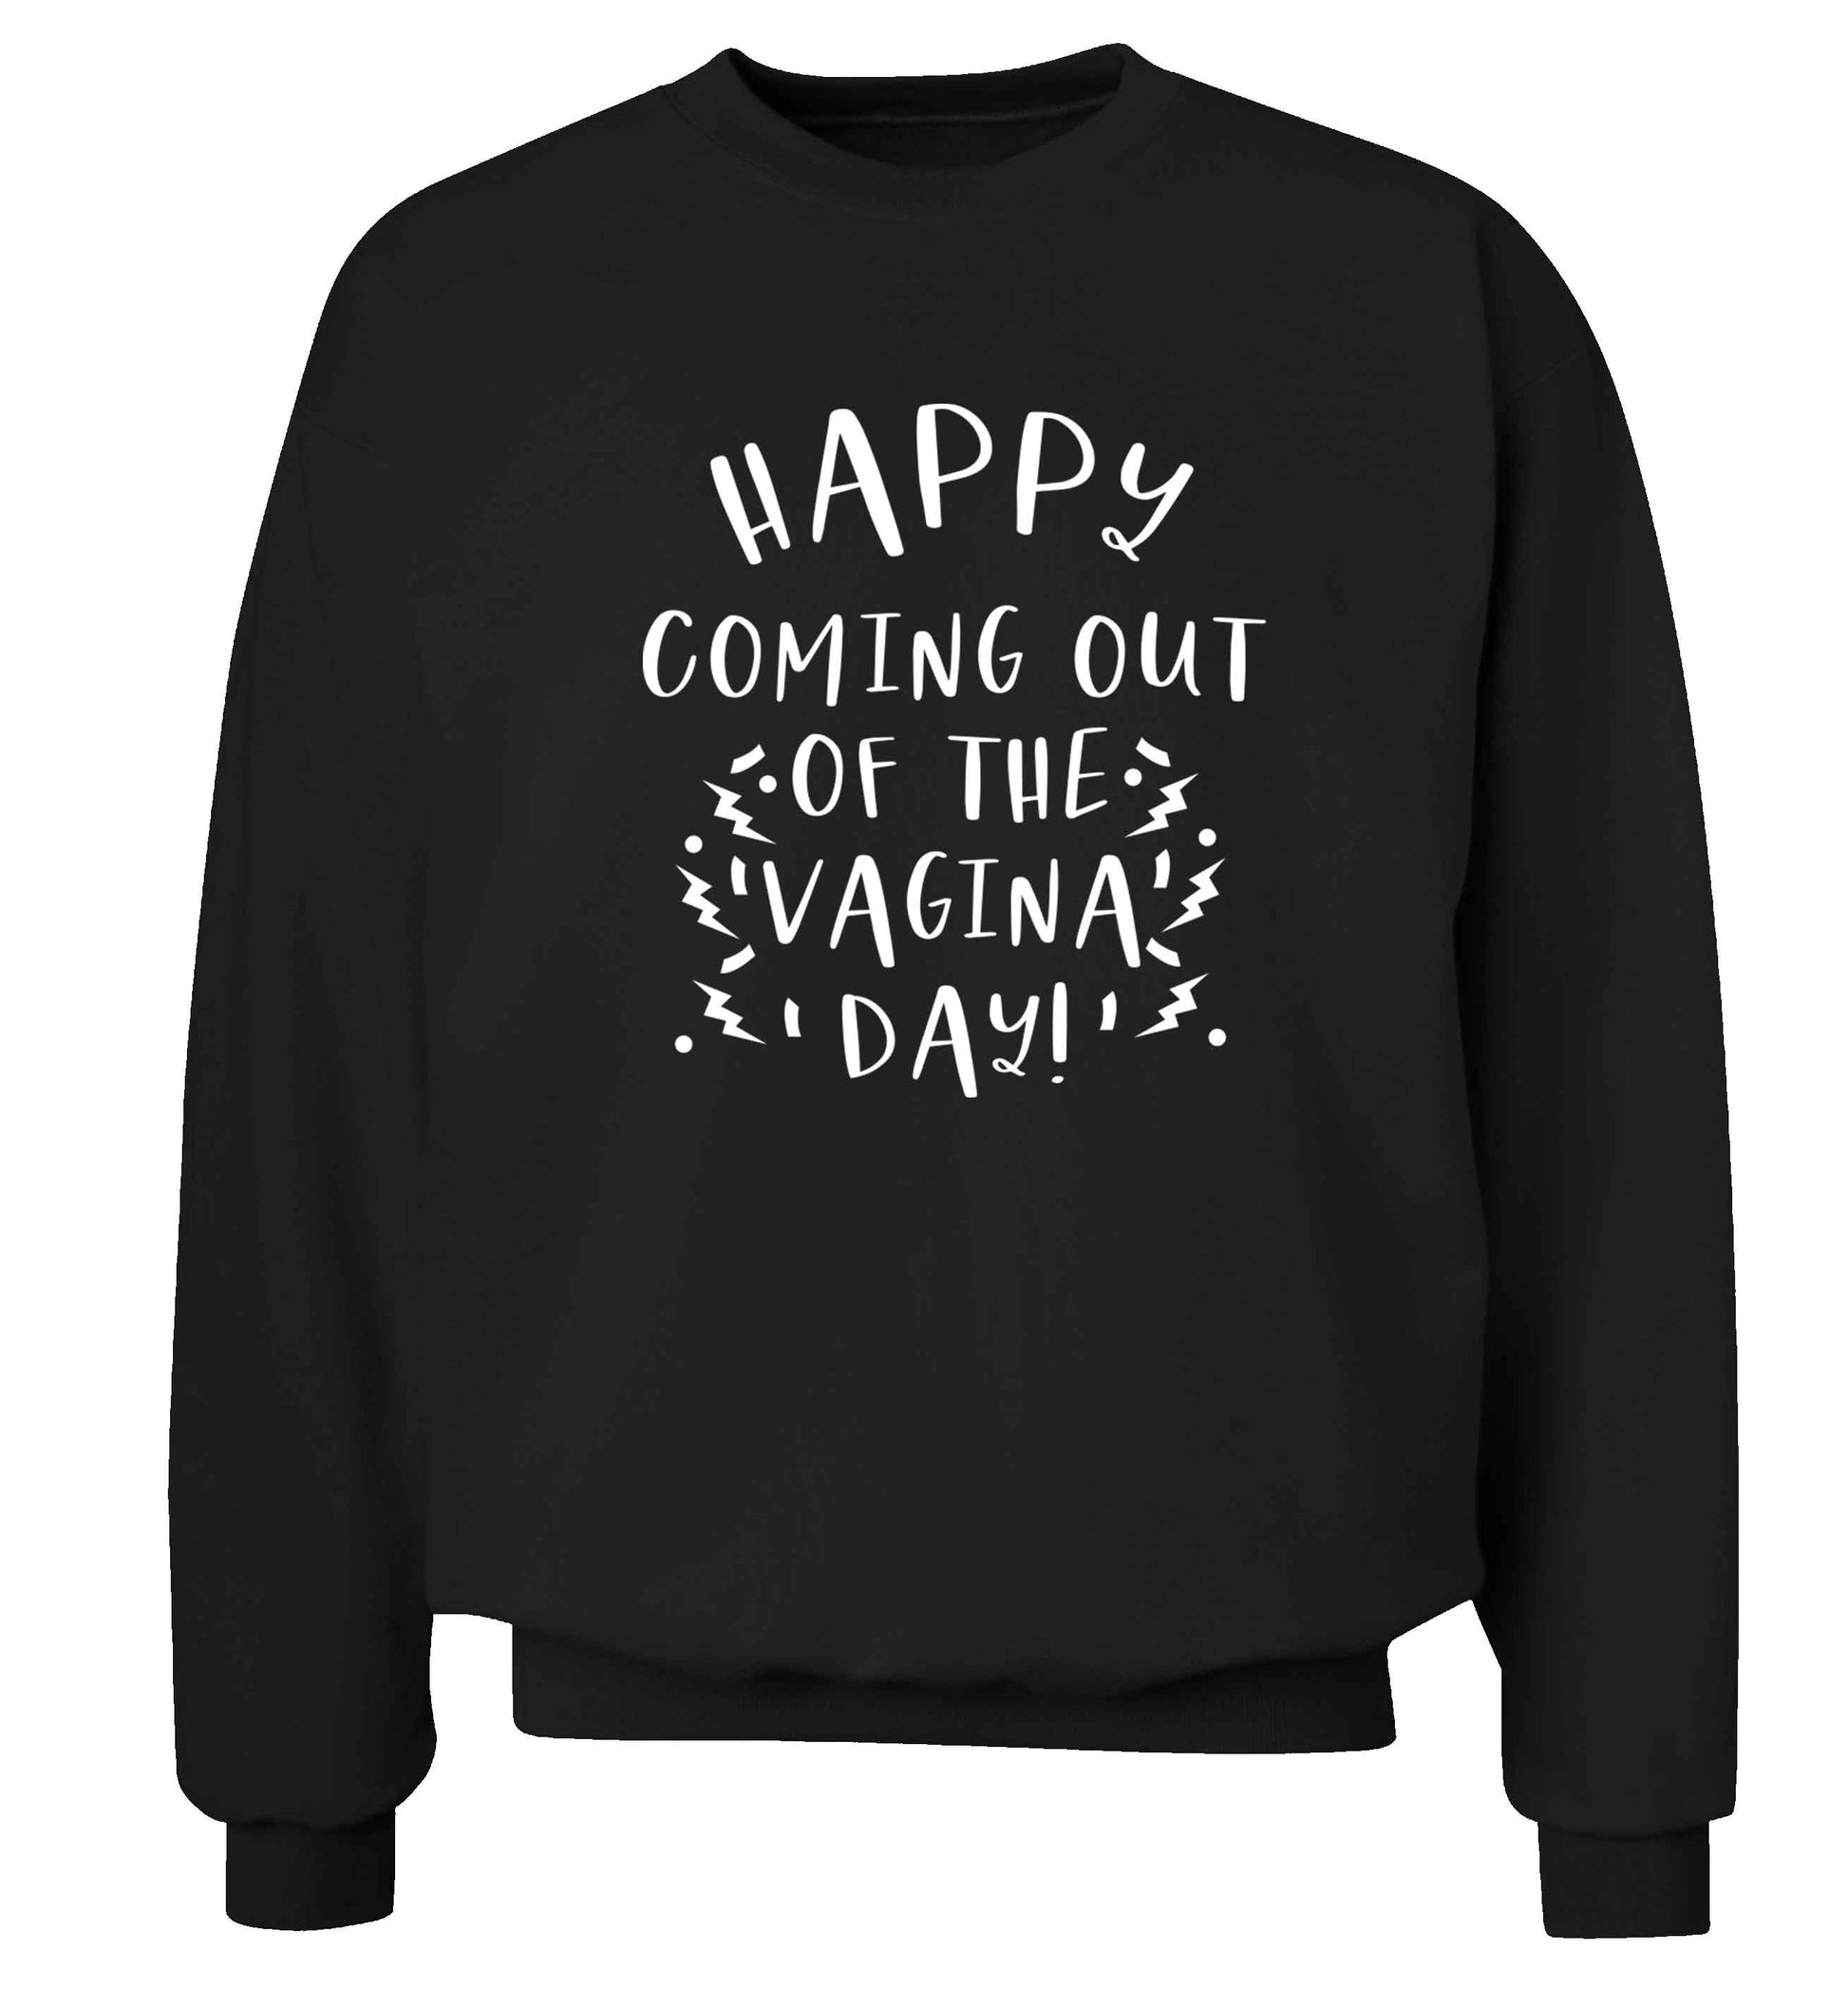 Happy coming out of the vagina day Adult's unisex black Sweater 2XL